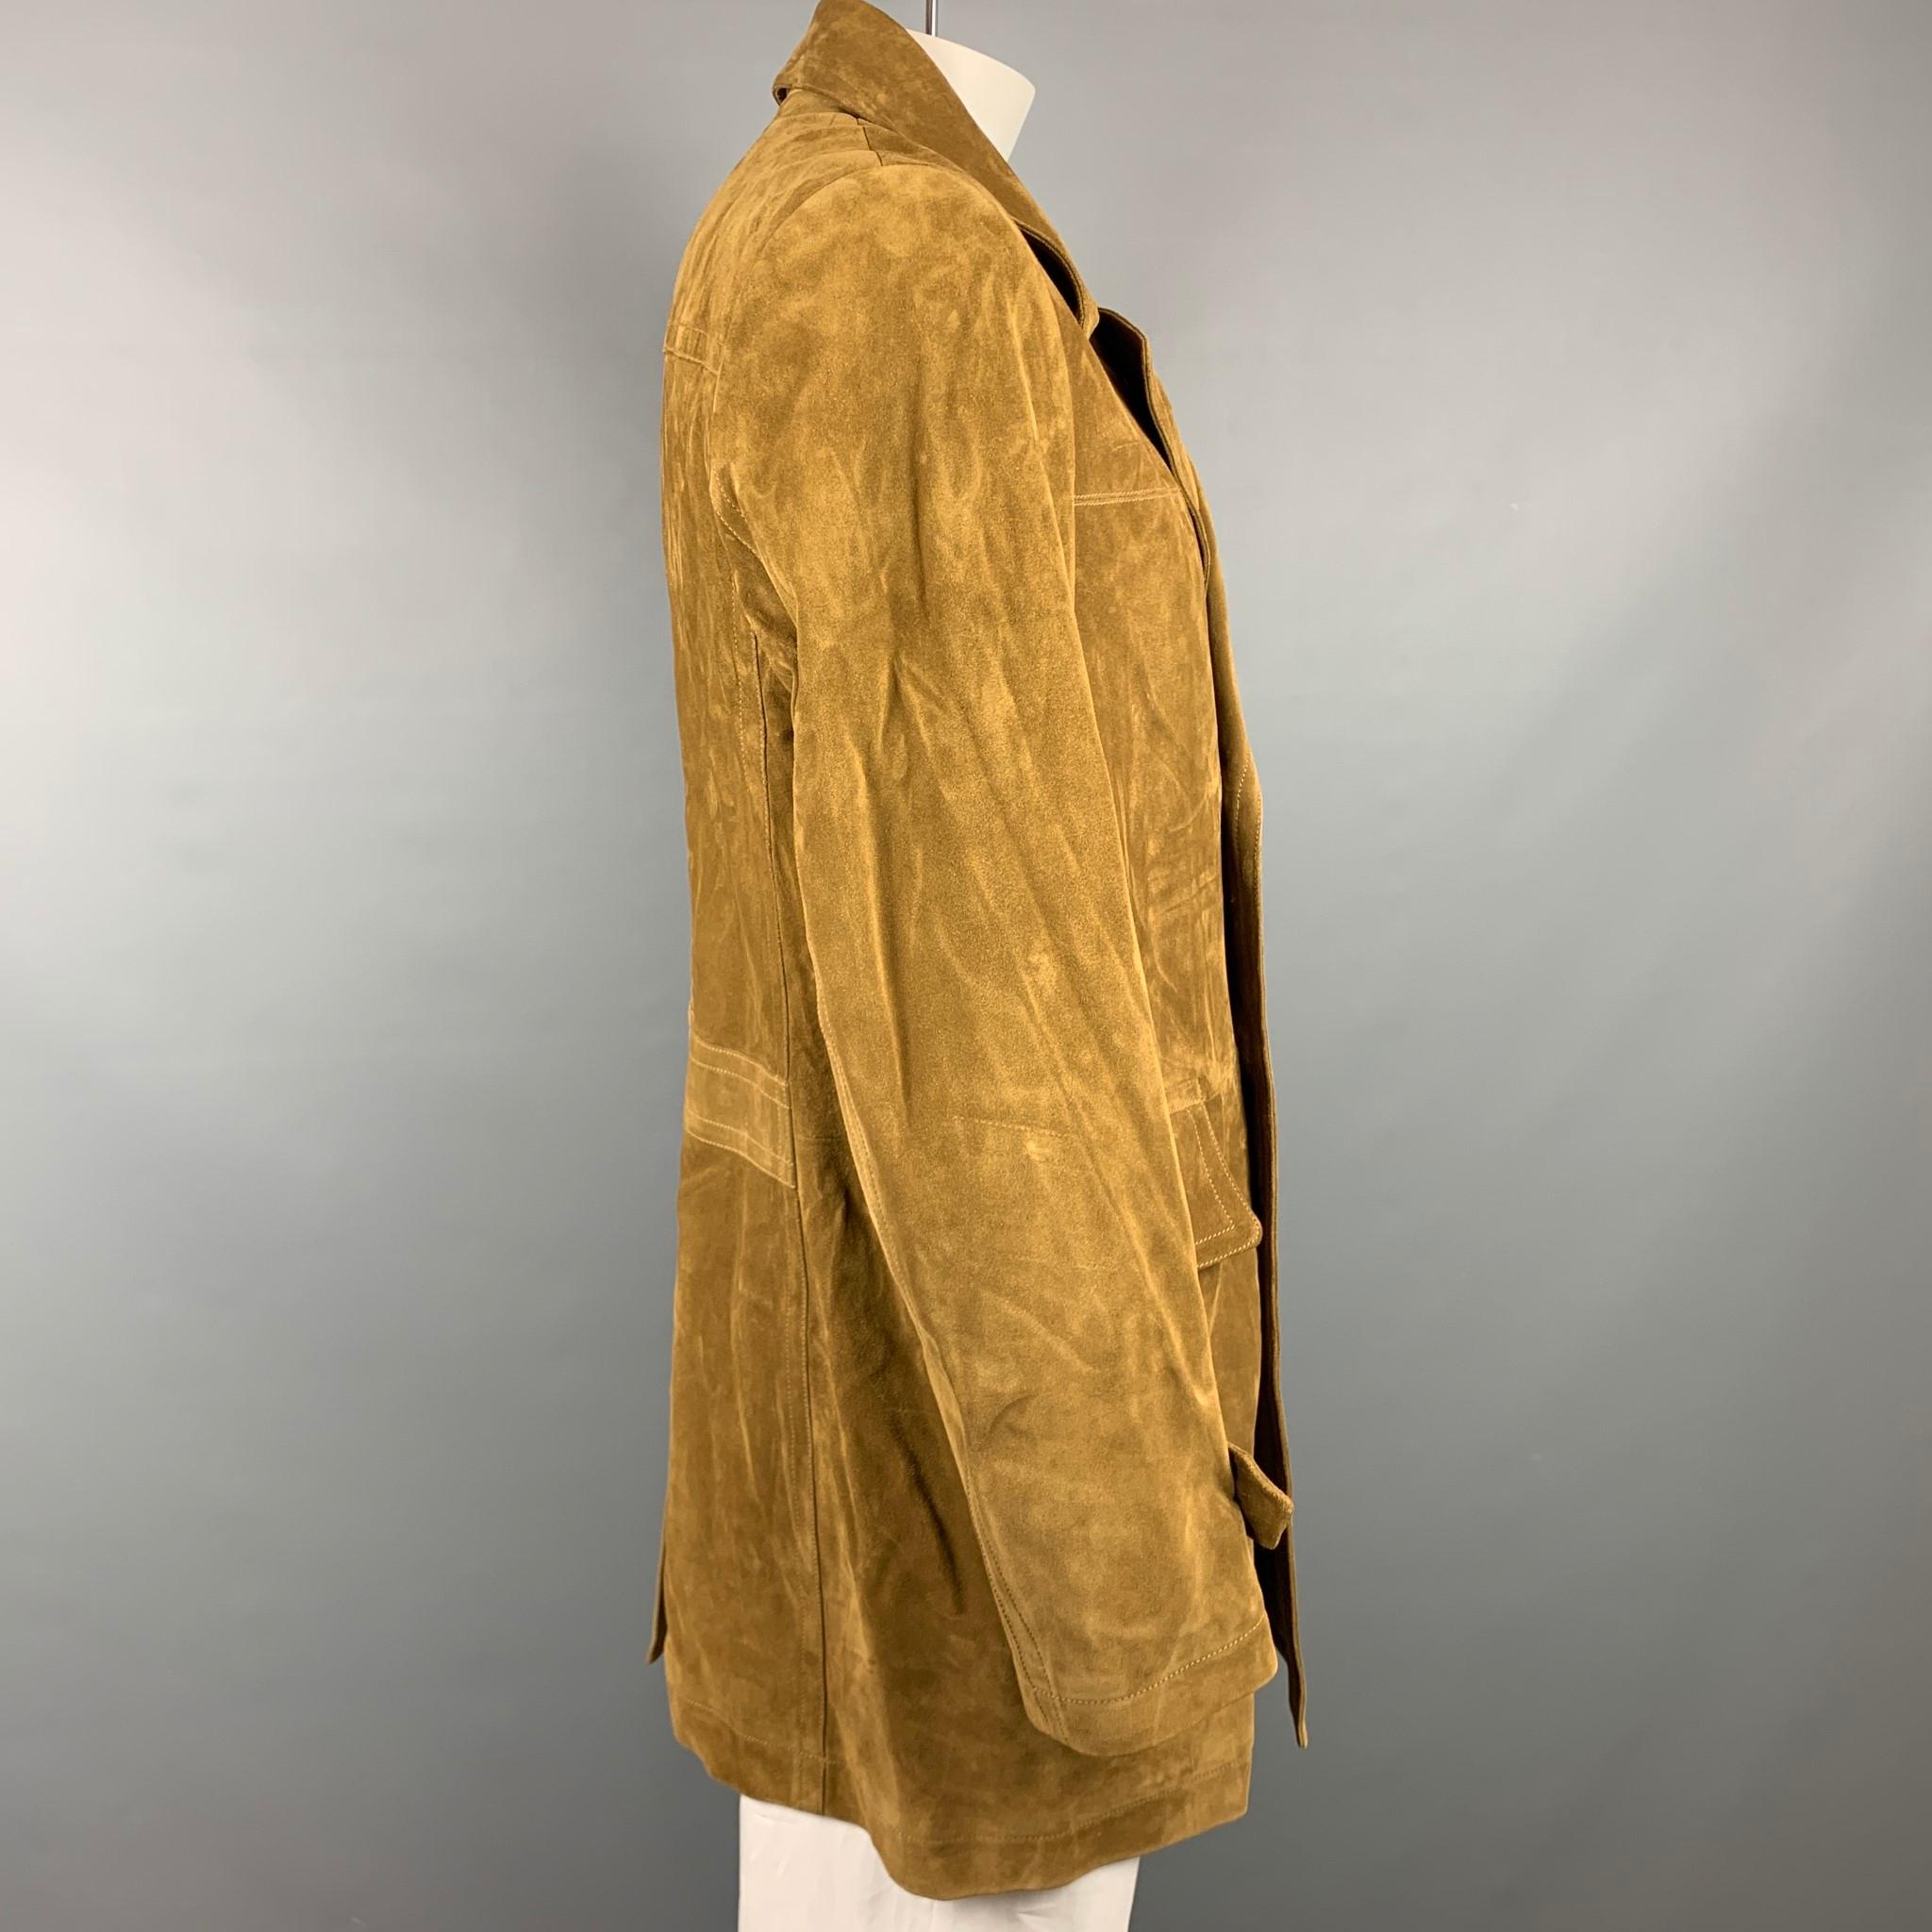 TOM FORD coat comes in a tan textured suede with a full liner featuring flap pockets, contrast stitching, notch lapel, and a double breasted closure. Made in Italy.

Very Good Pre-Owned Condition.
Marked: IT 58
Original Retail Price: